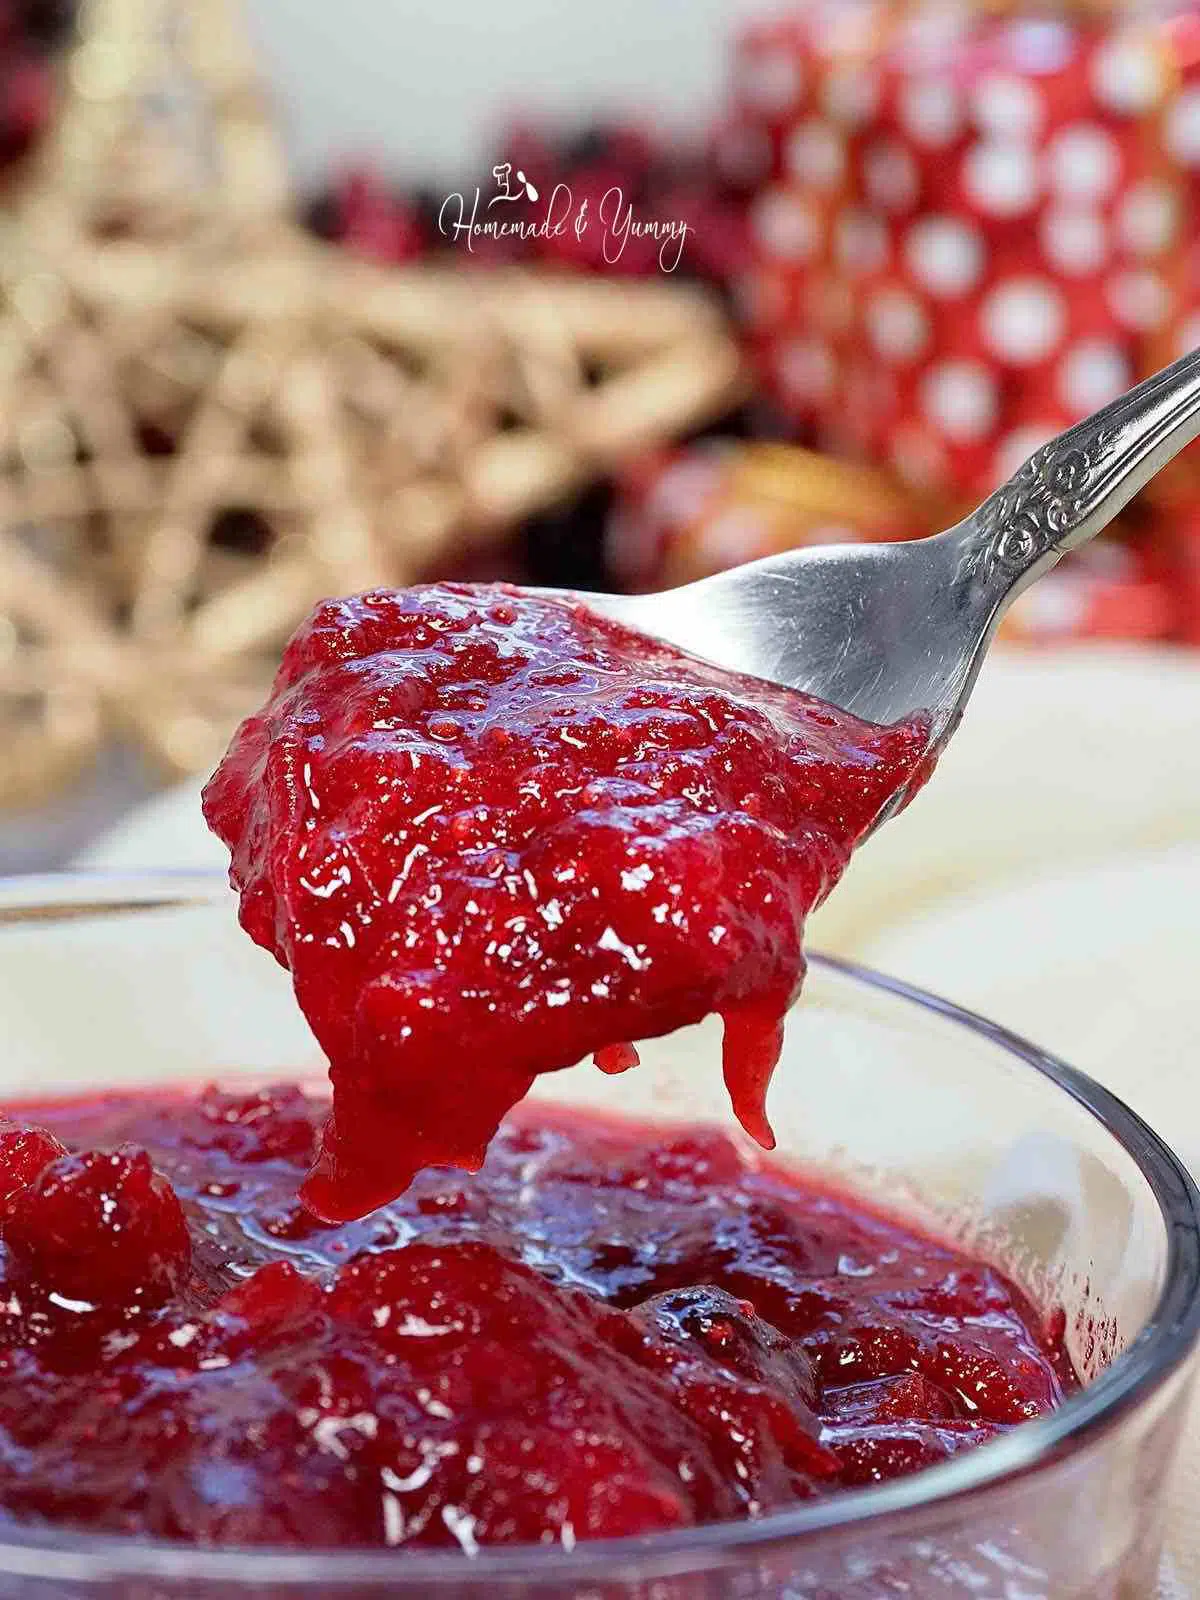 A spoonful of homemade sauce with cranberries.